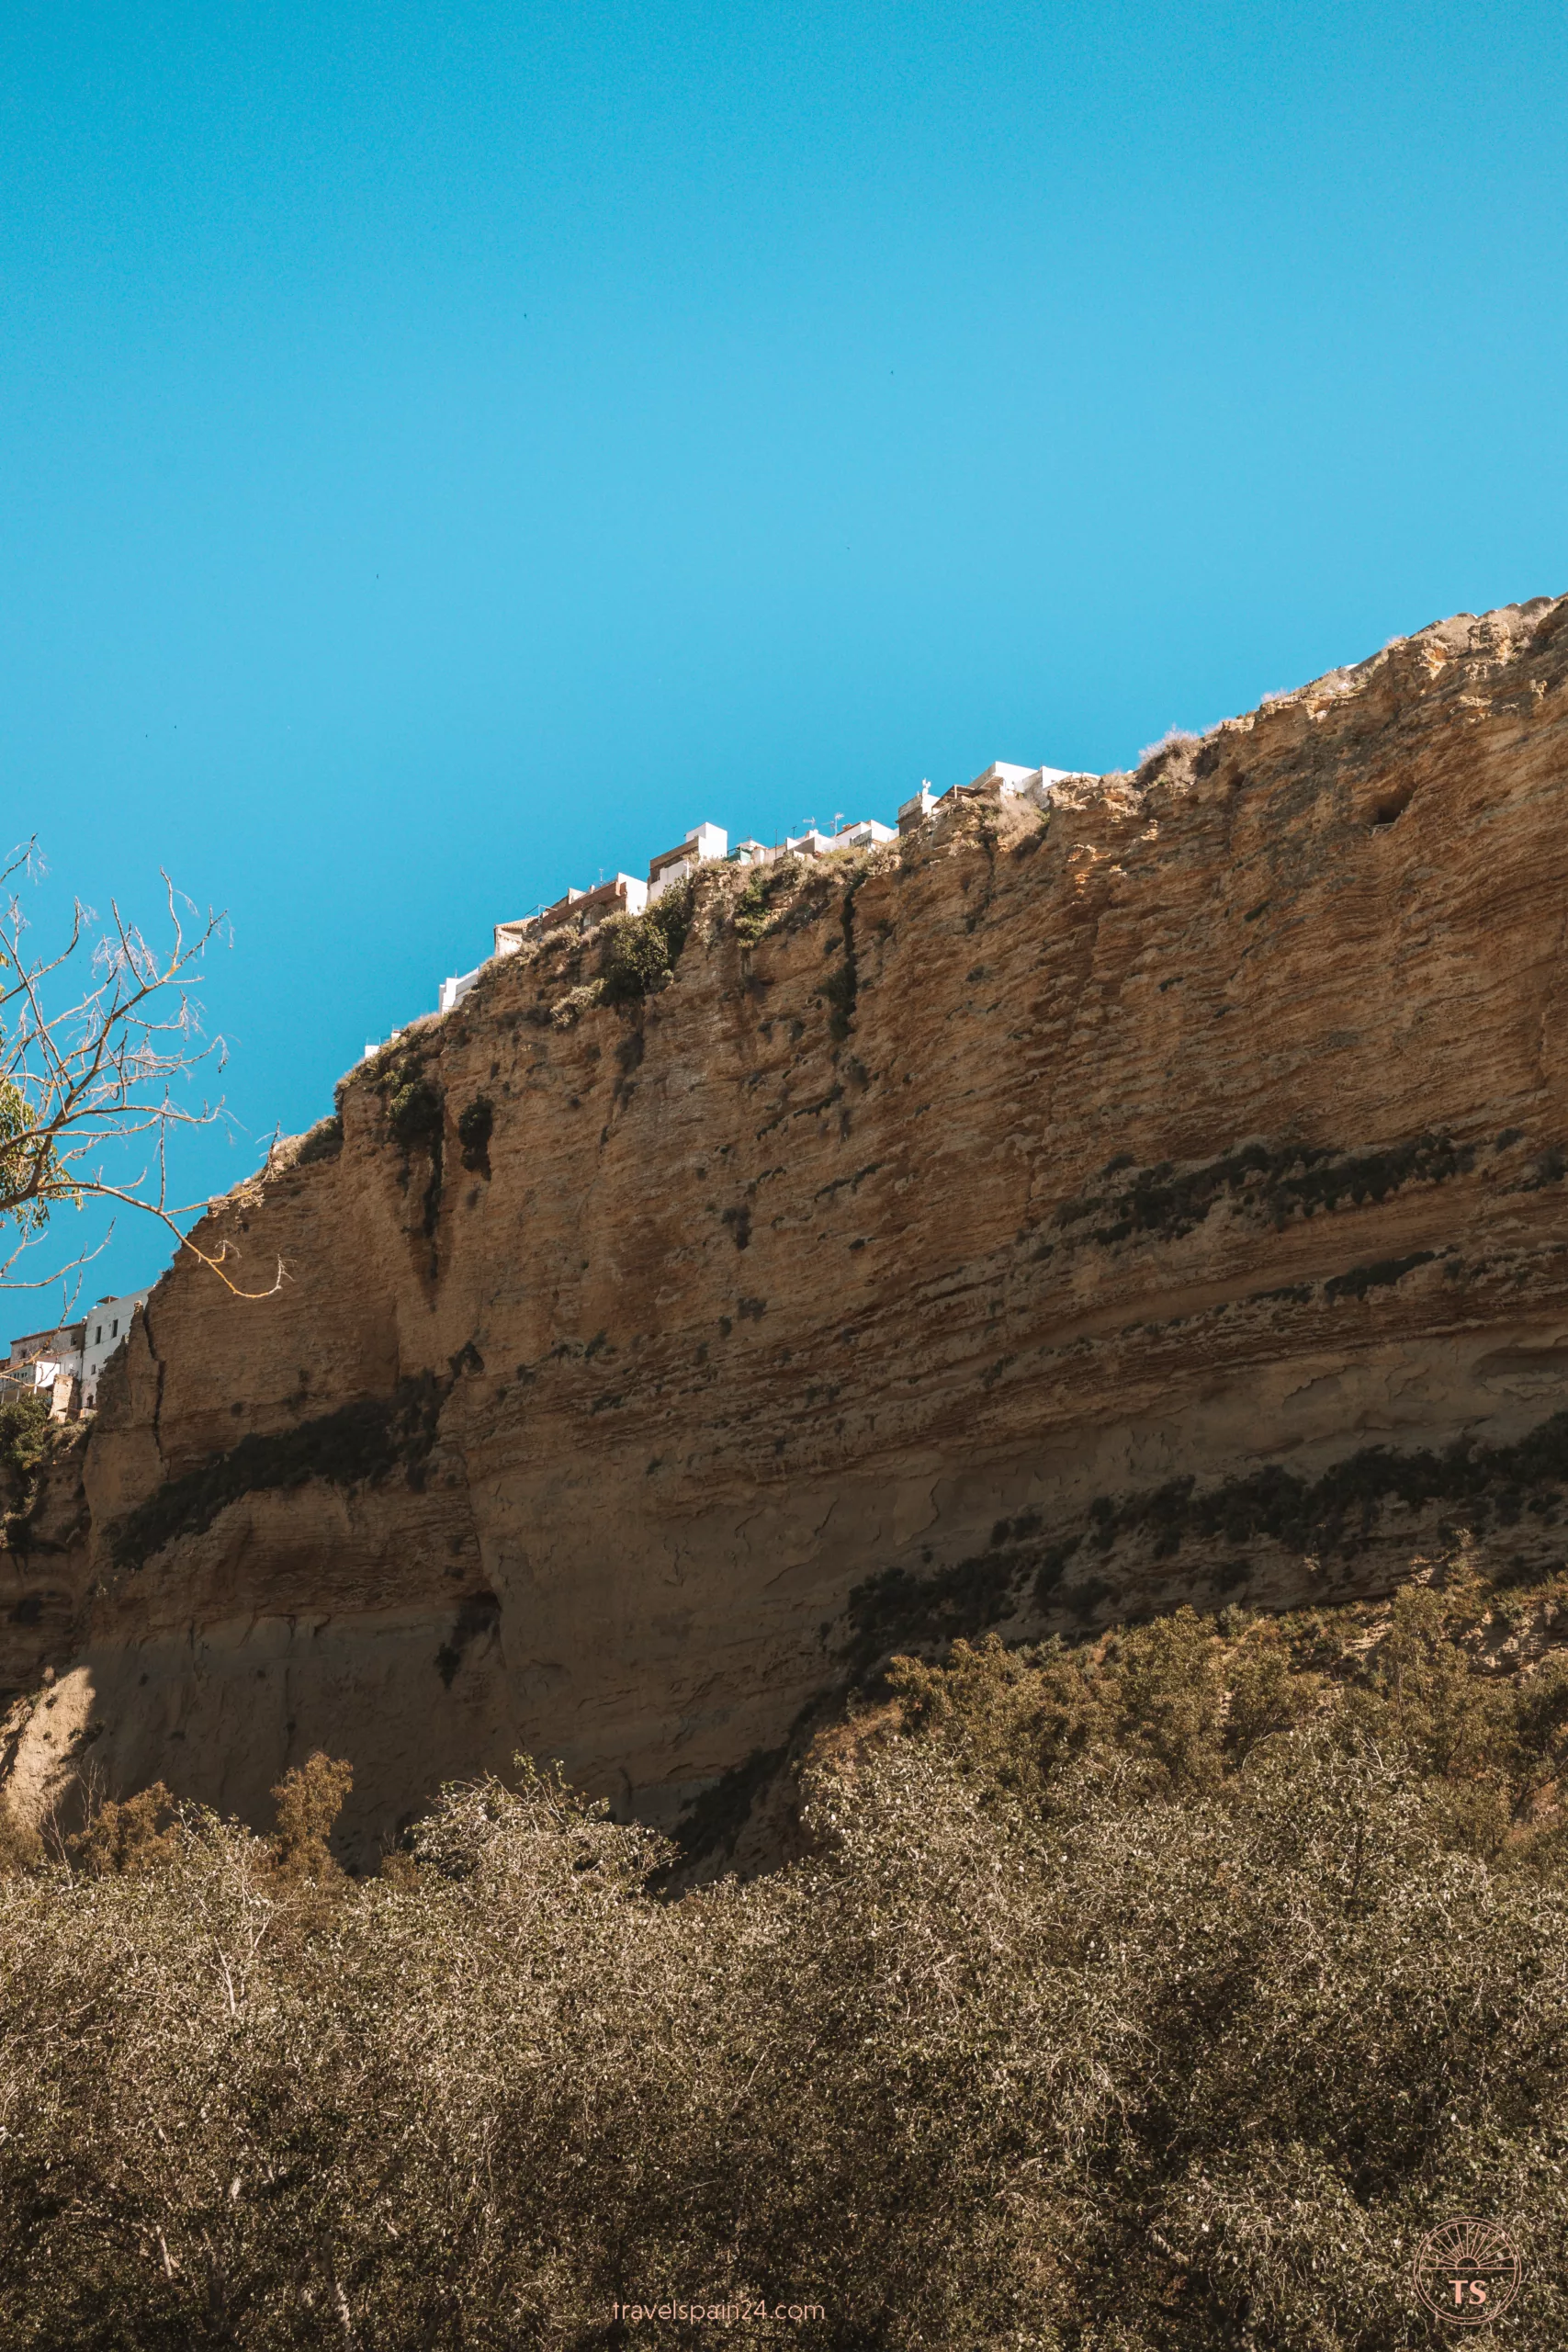 The high cliff of Arcos de la Frontera, seen from below during our walk back to the camper.